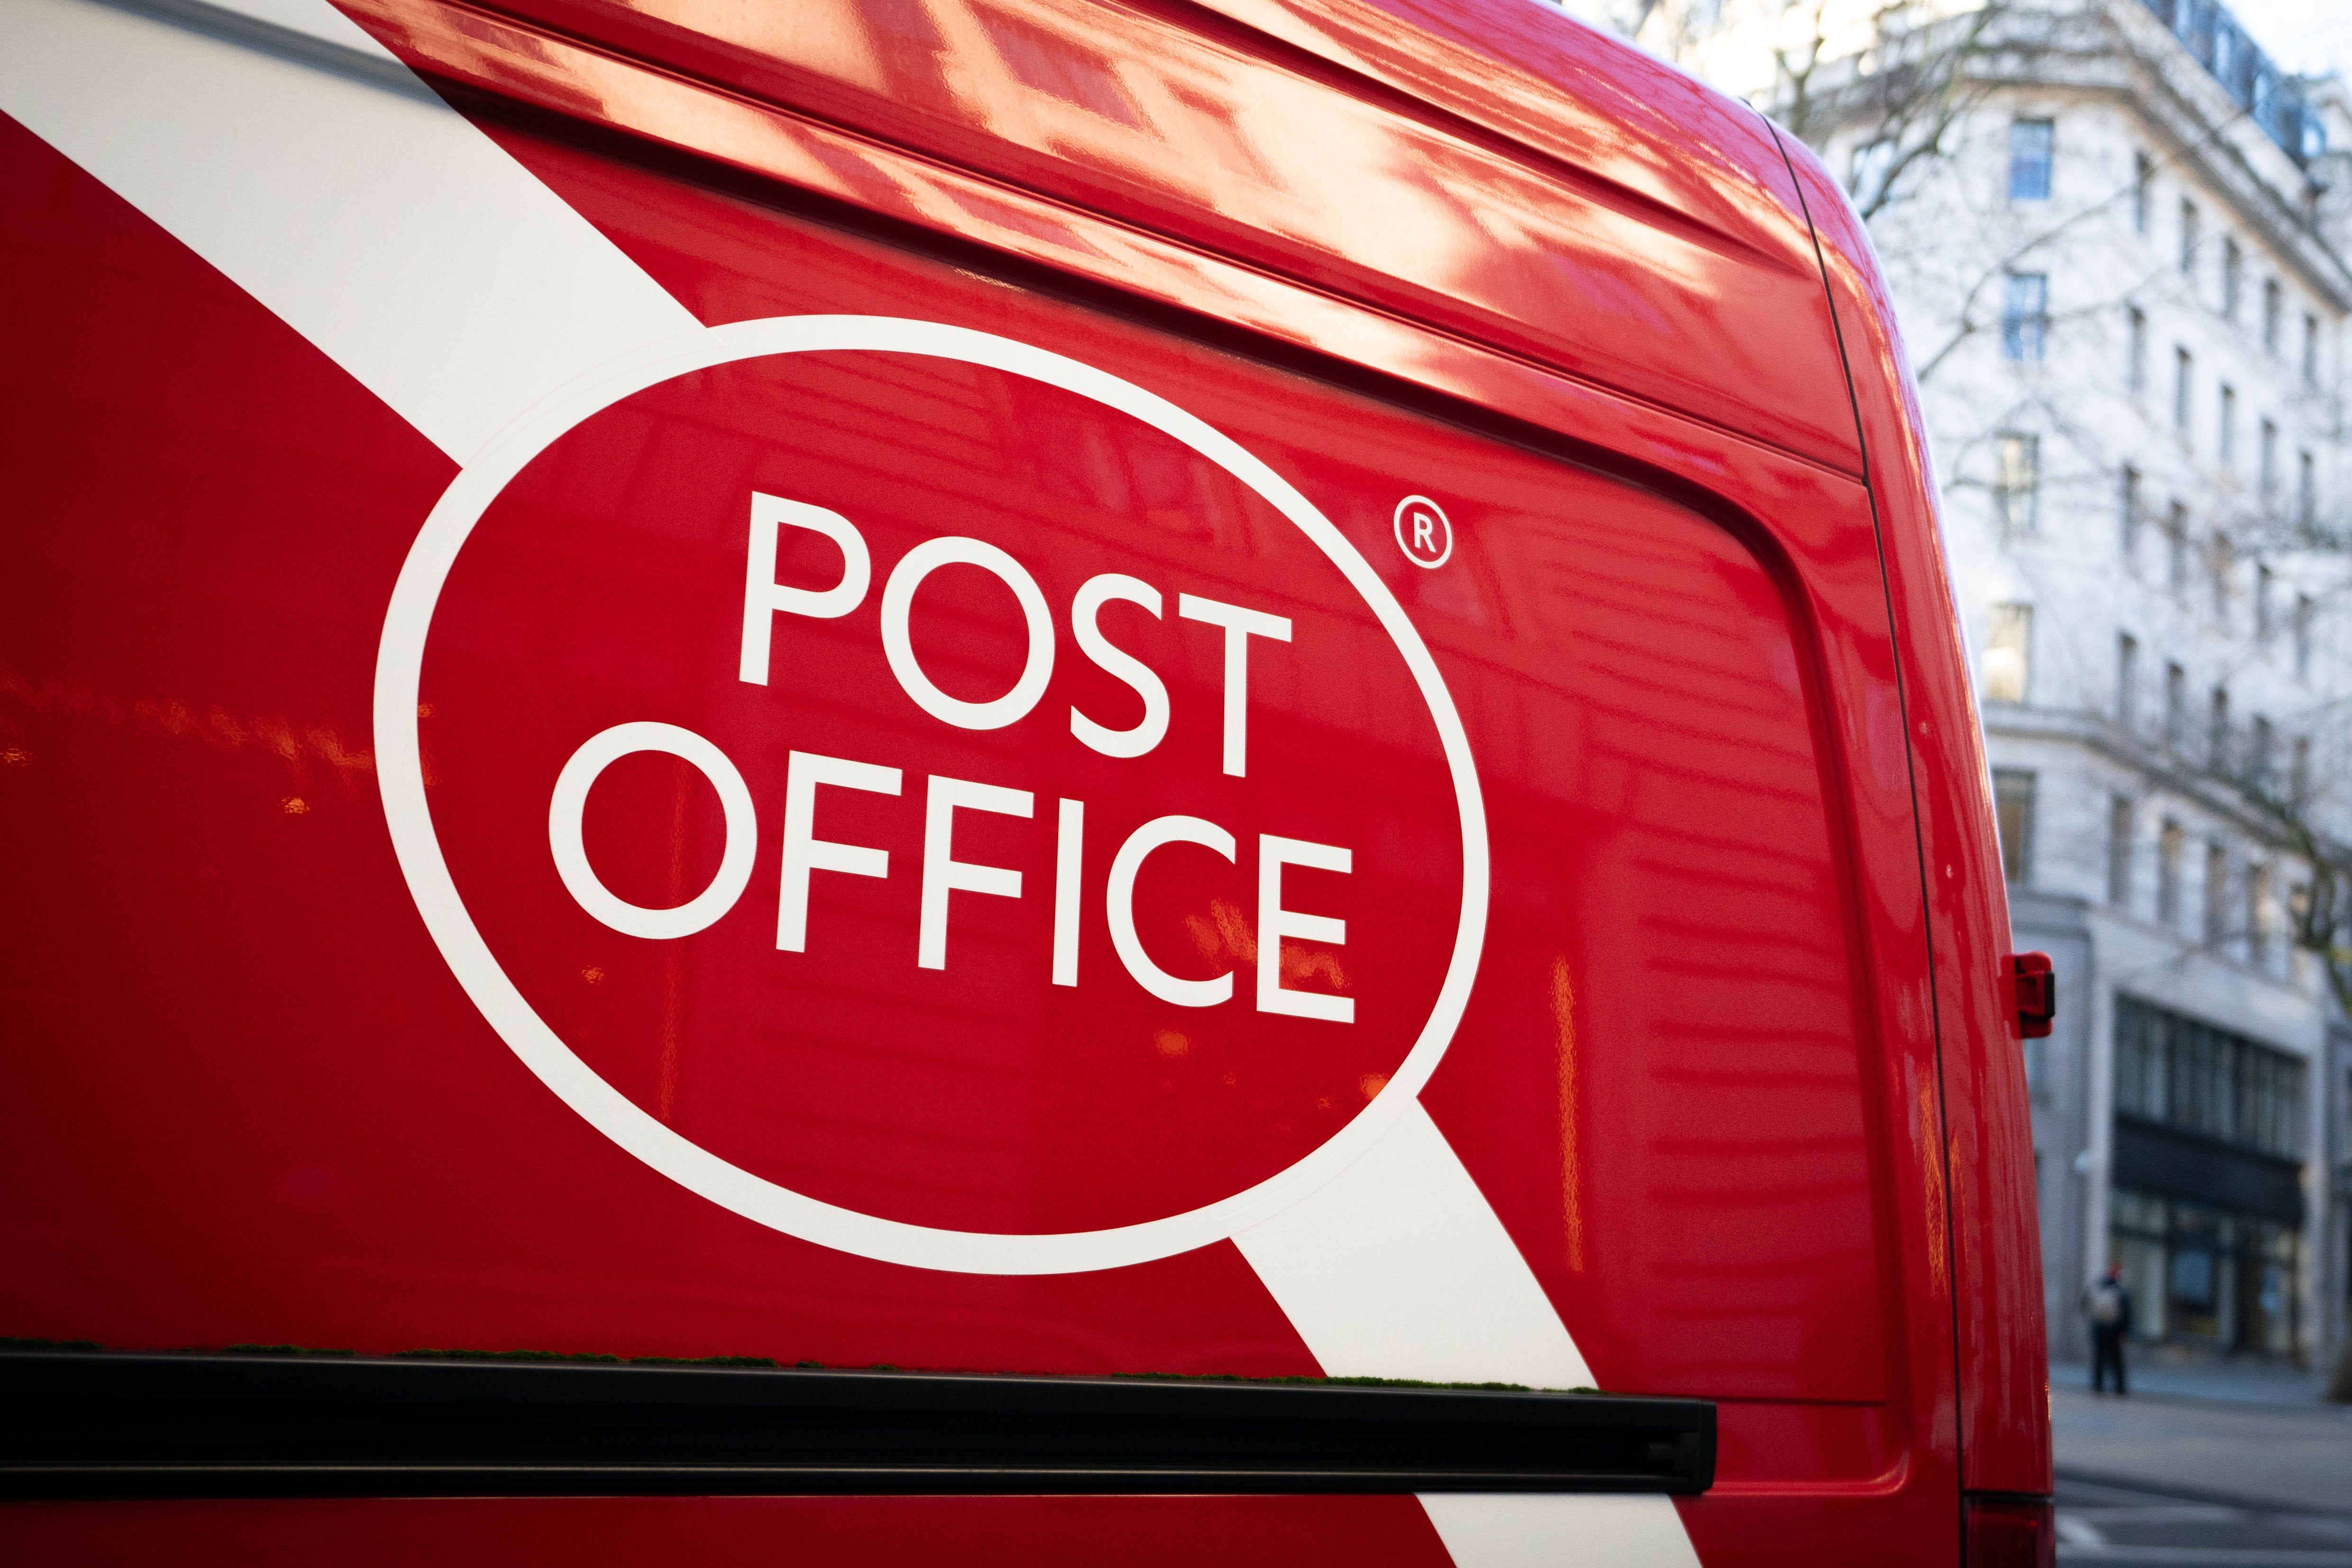 The Post Office told the BBC it will not comment while the public inquiry continues (PA)